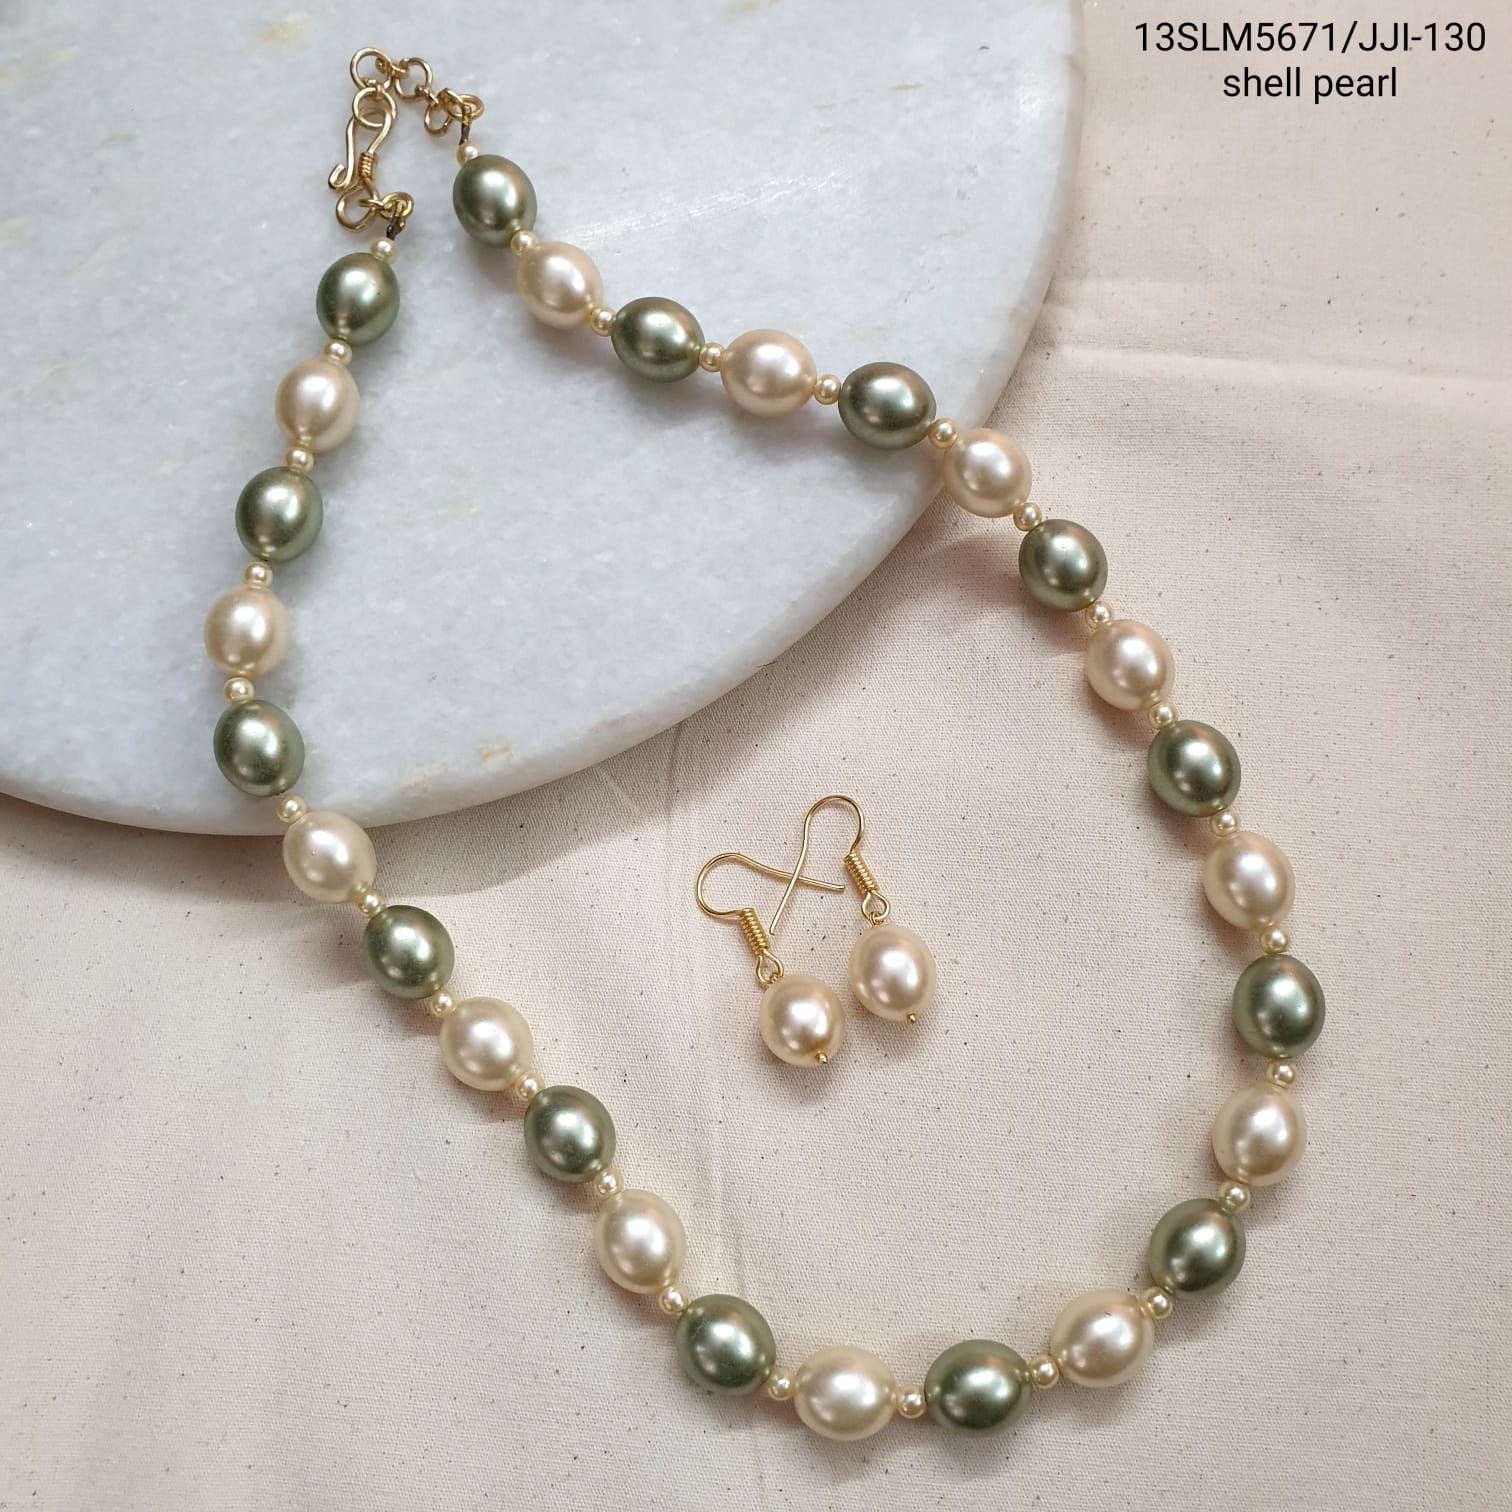 Golden and Green Shell Pearl Necklace